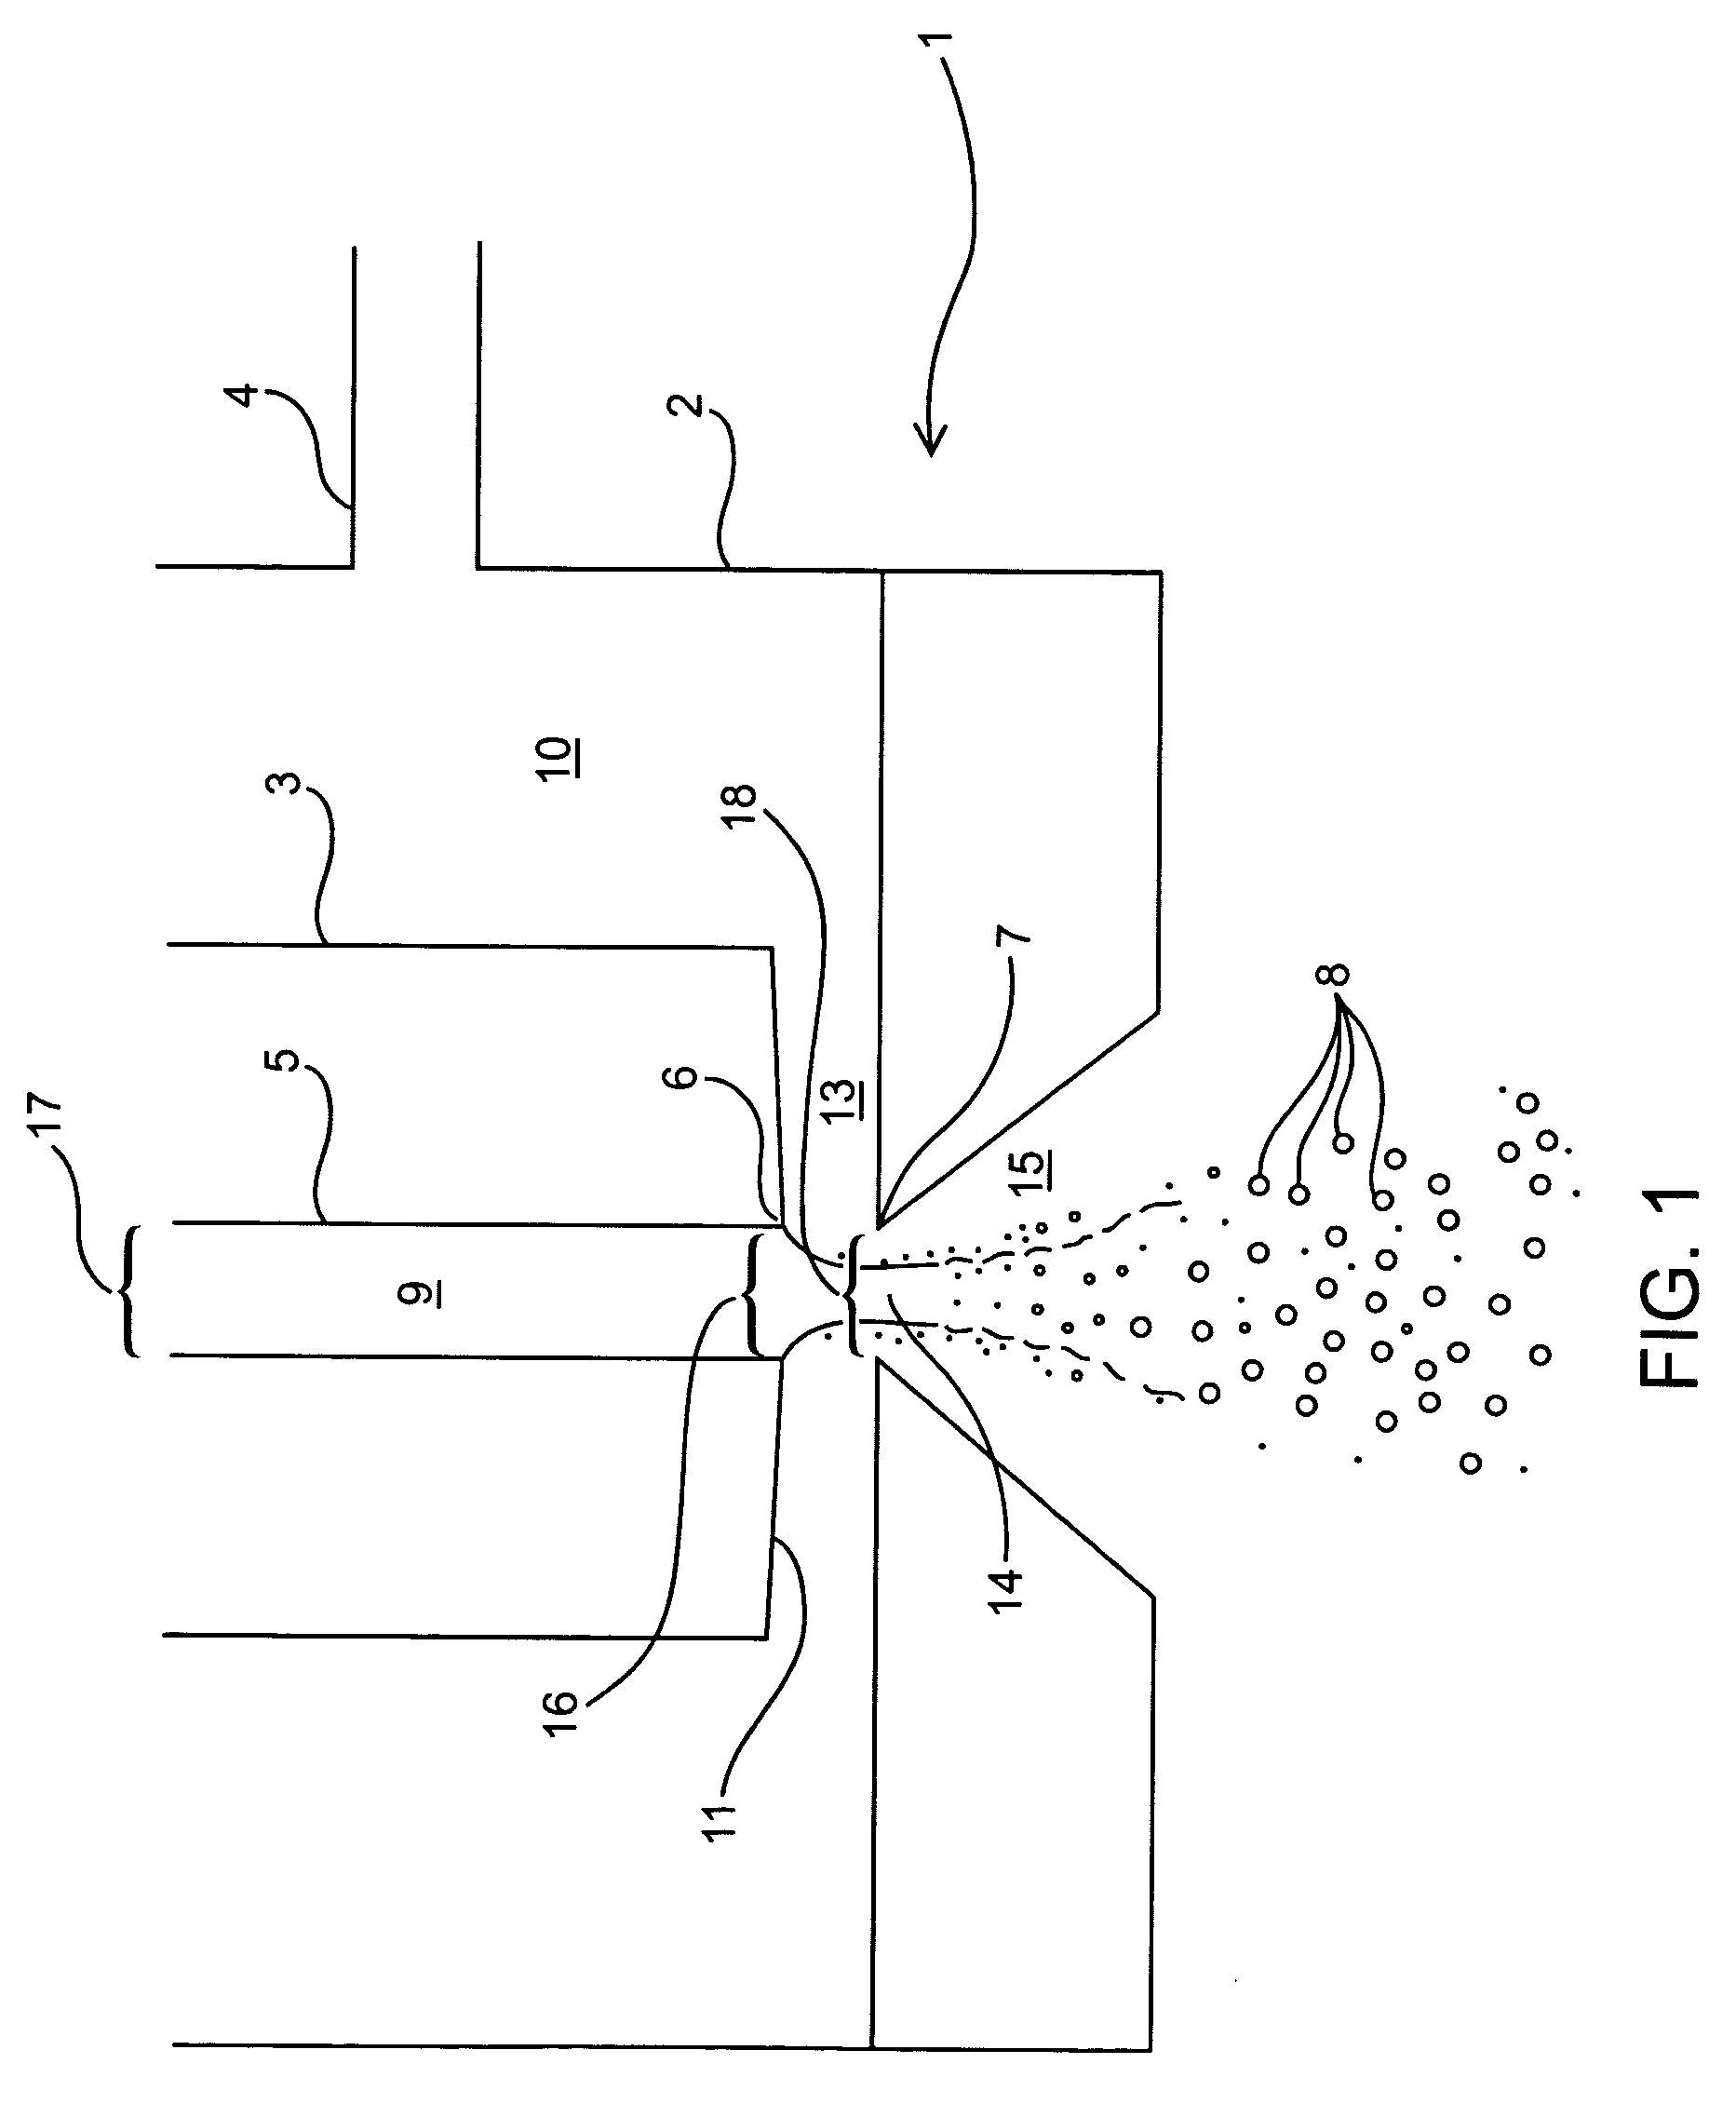 Aerosol created by directed flow of fluids and devices and methods for producing same